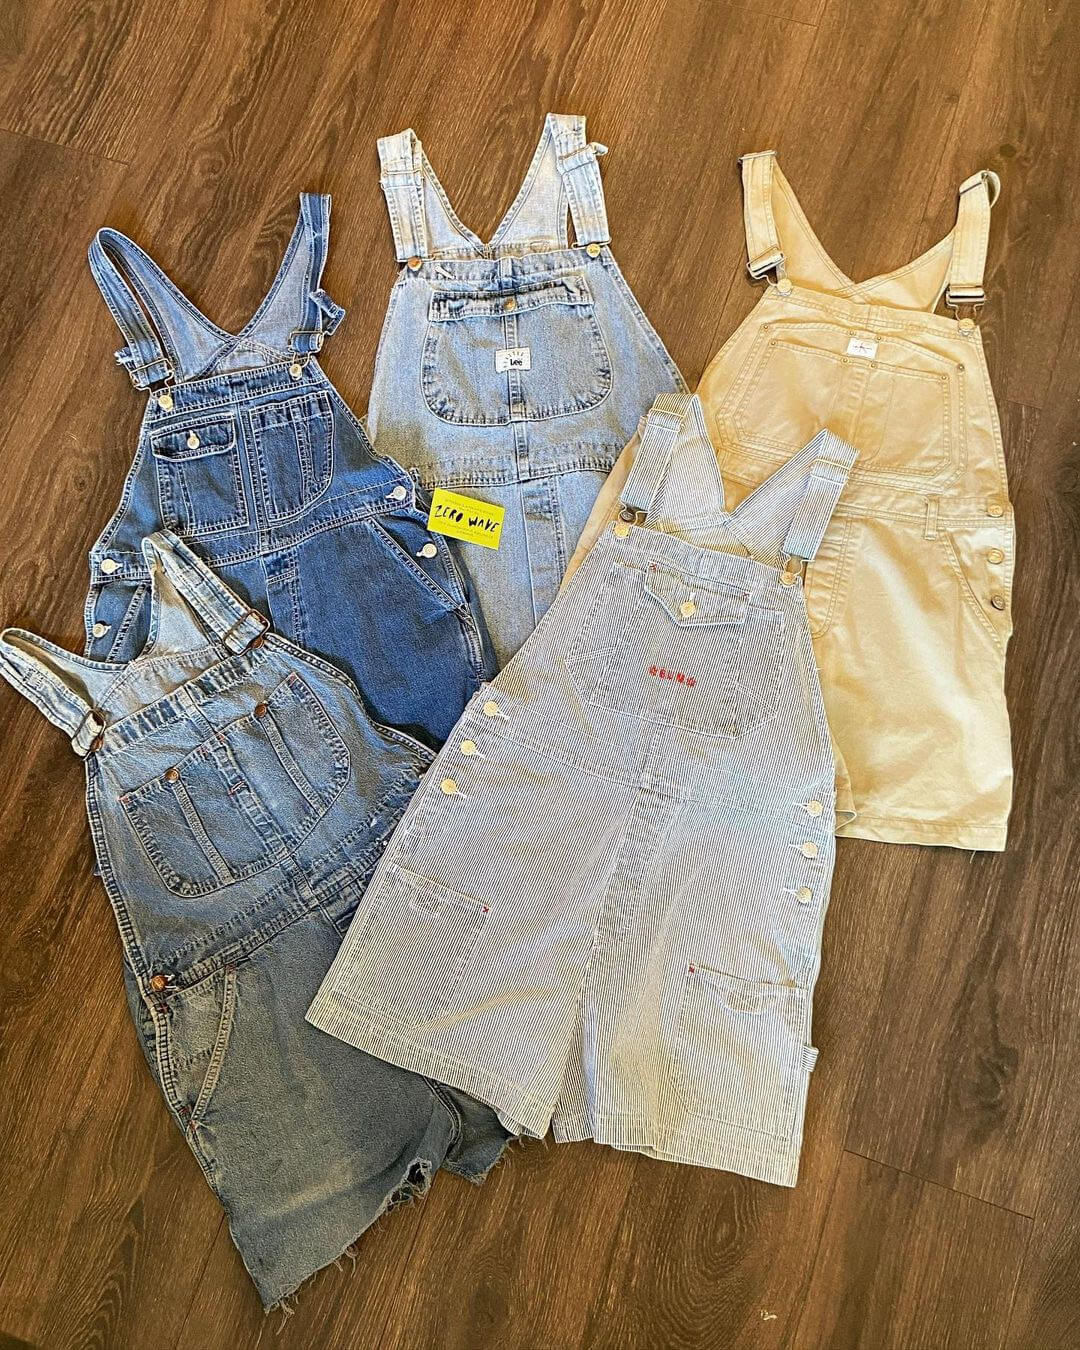 vintage overalls from zero wave in portland, or